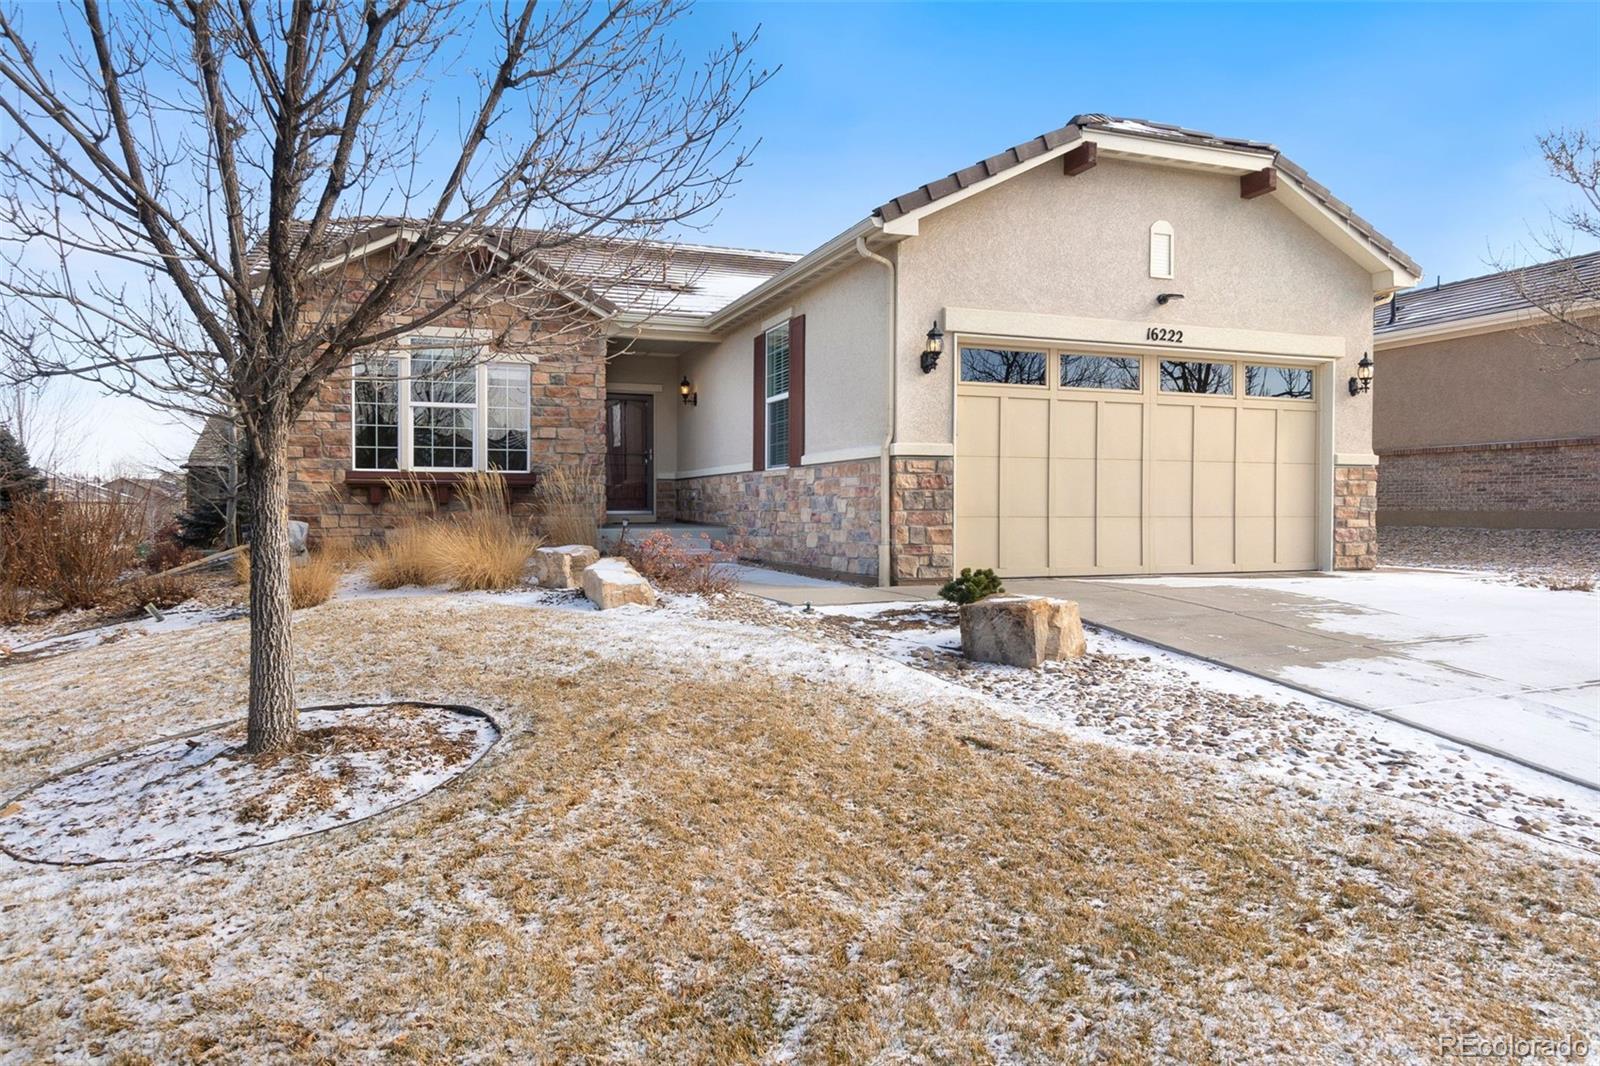 16222  Red Mountain Way, broomfield MLS: 4853051 Beds: 2 Baths: 2 Price: $630,000